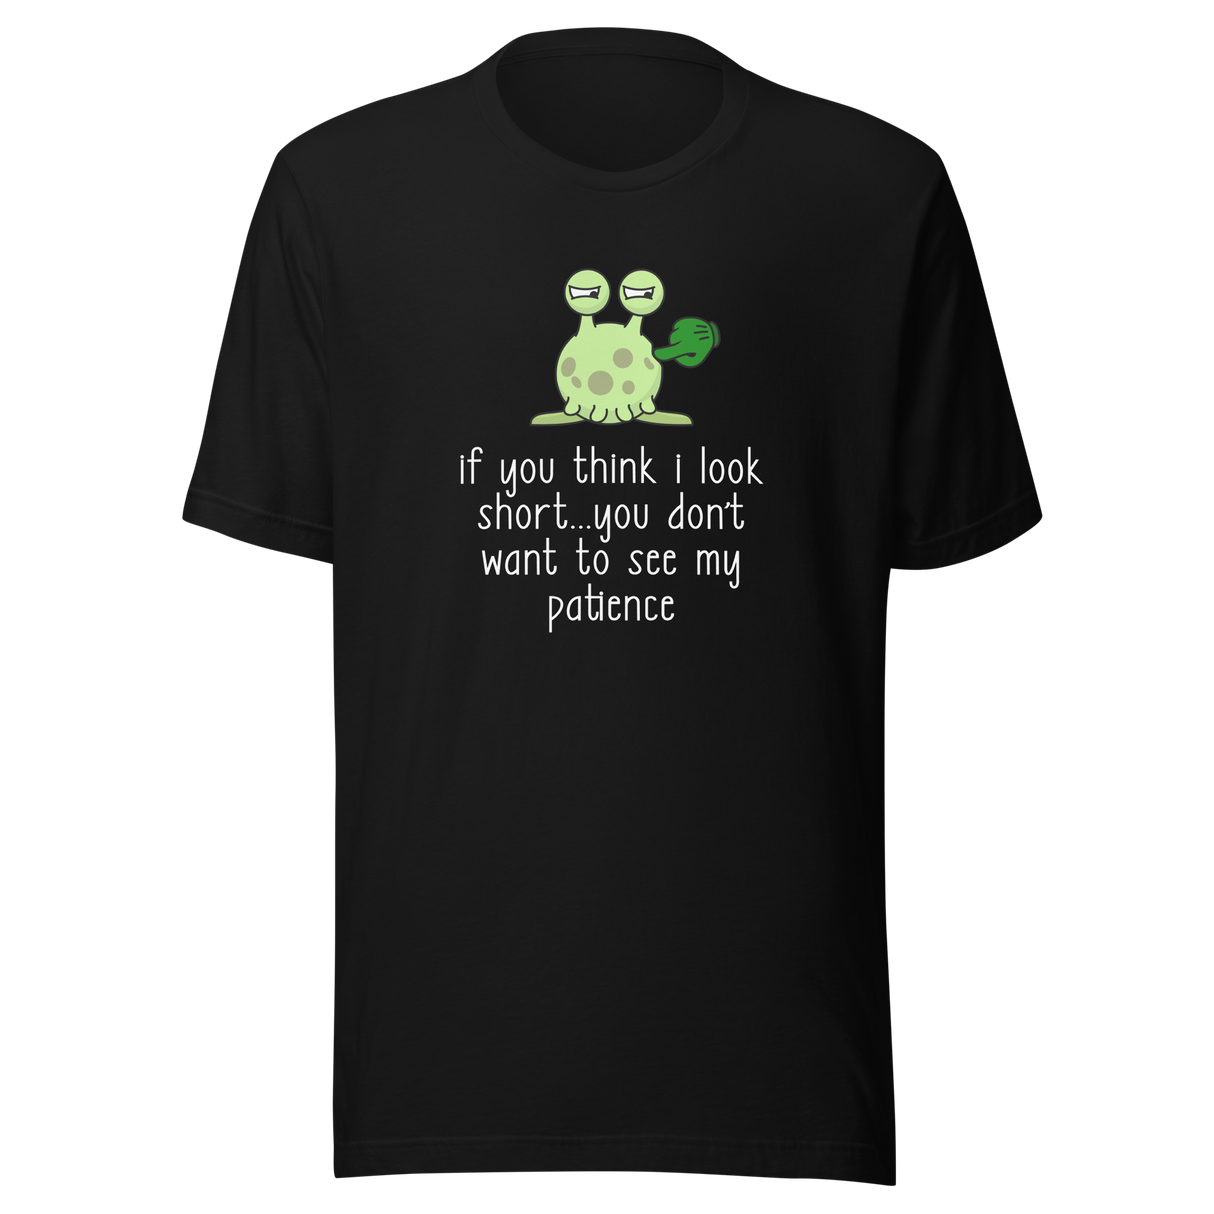 if-you-think-i-look-short-dont-want-to-see-my-patience-patience-tee-you-should-see-my-t-shirt-look-short-tee-gift-t-shirt-tee#color_black